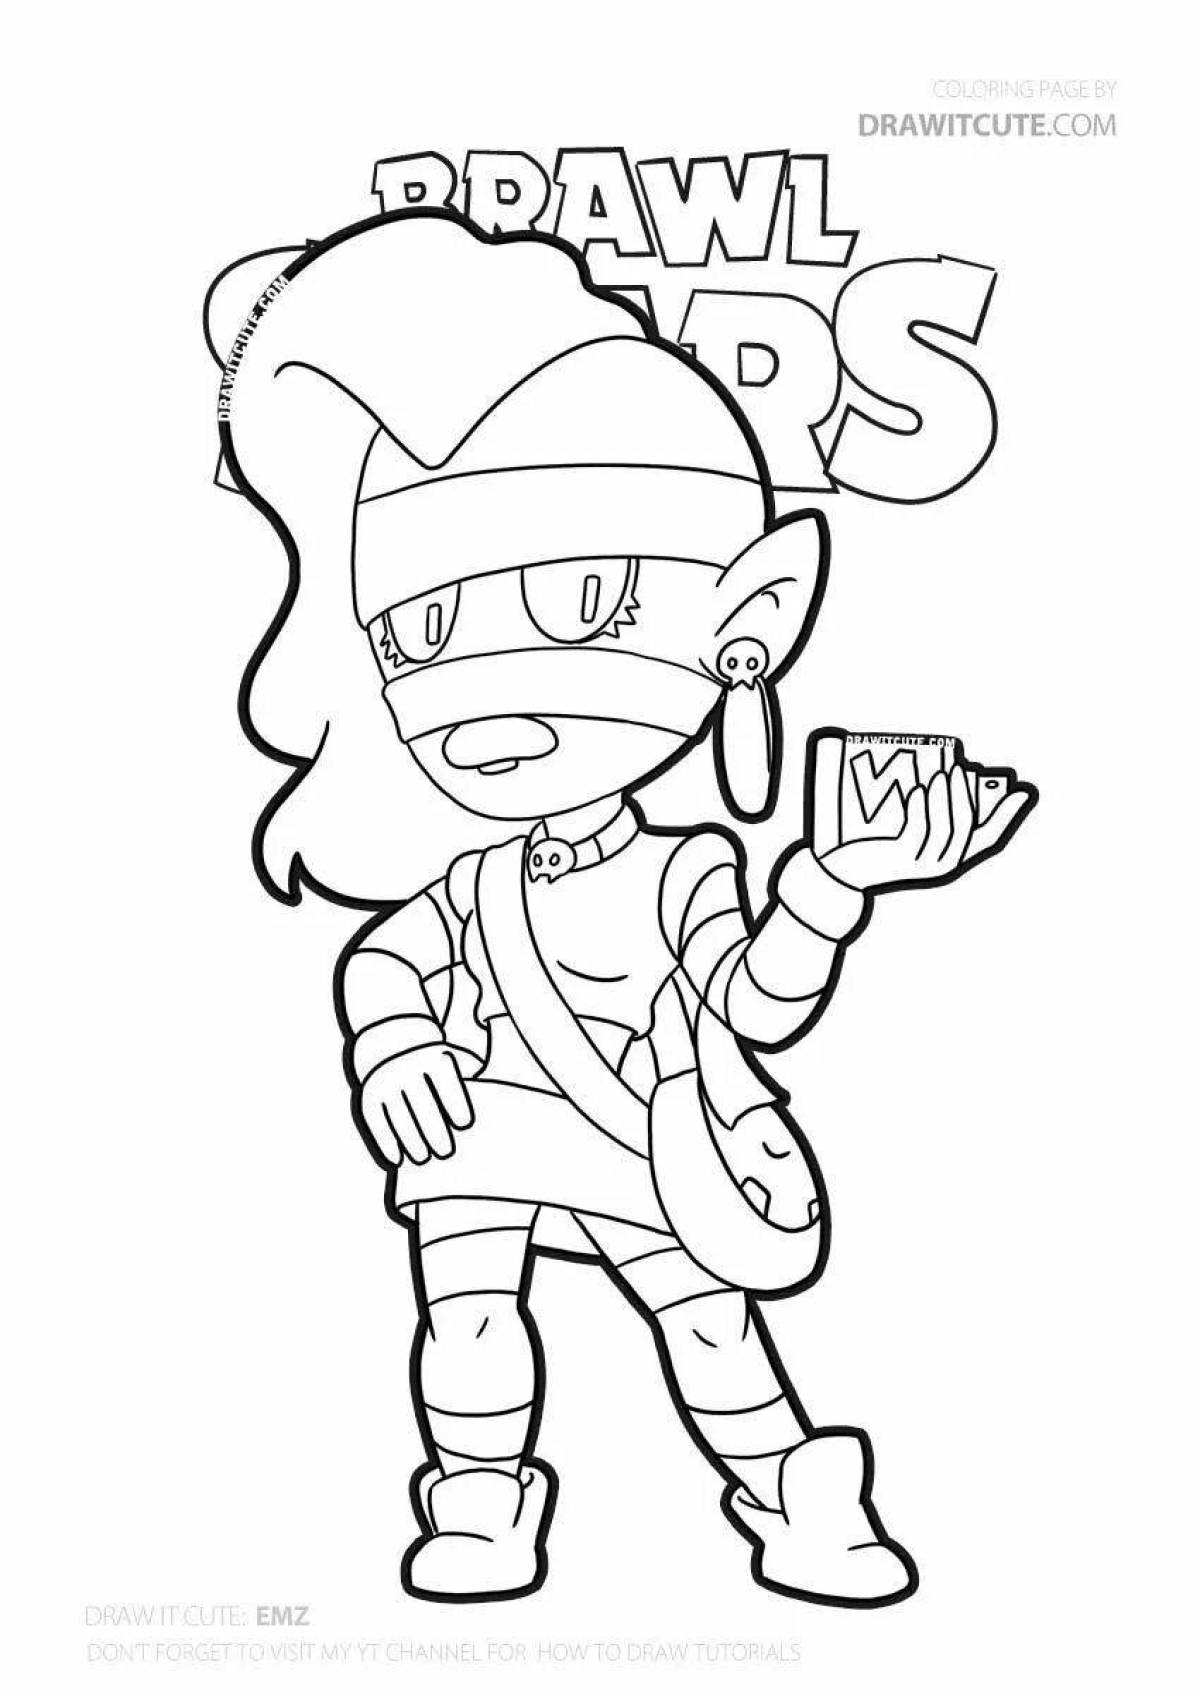 Playful coloring of sandy from brawl stars